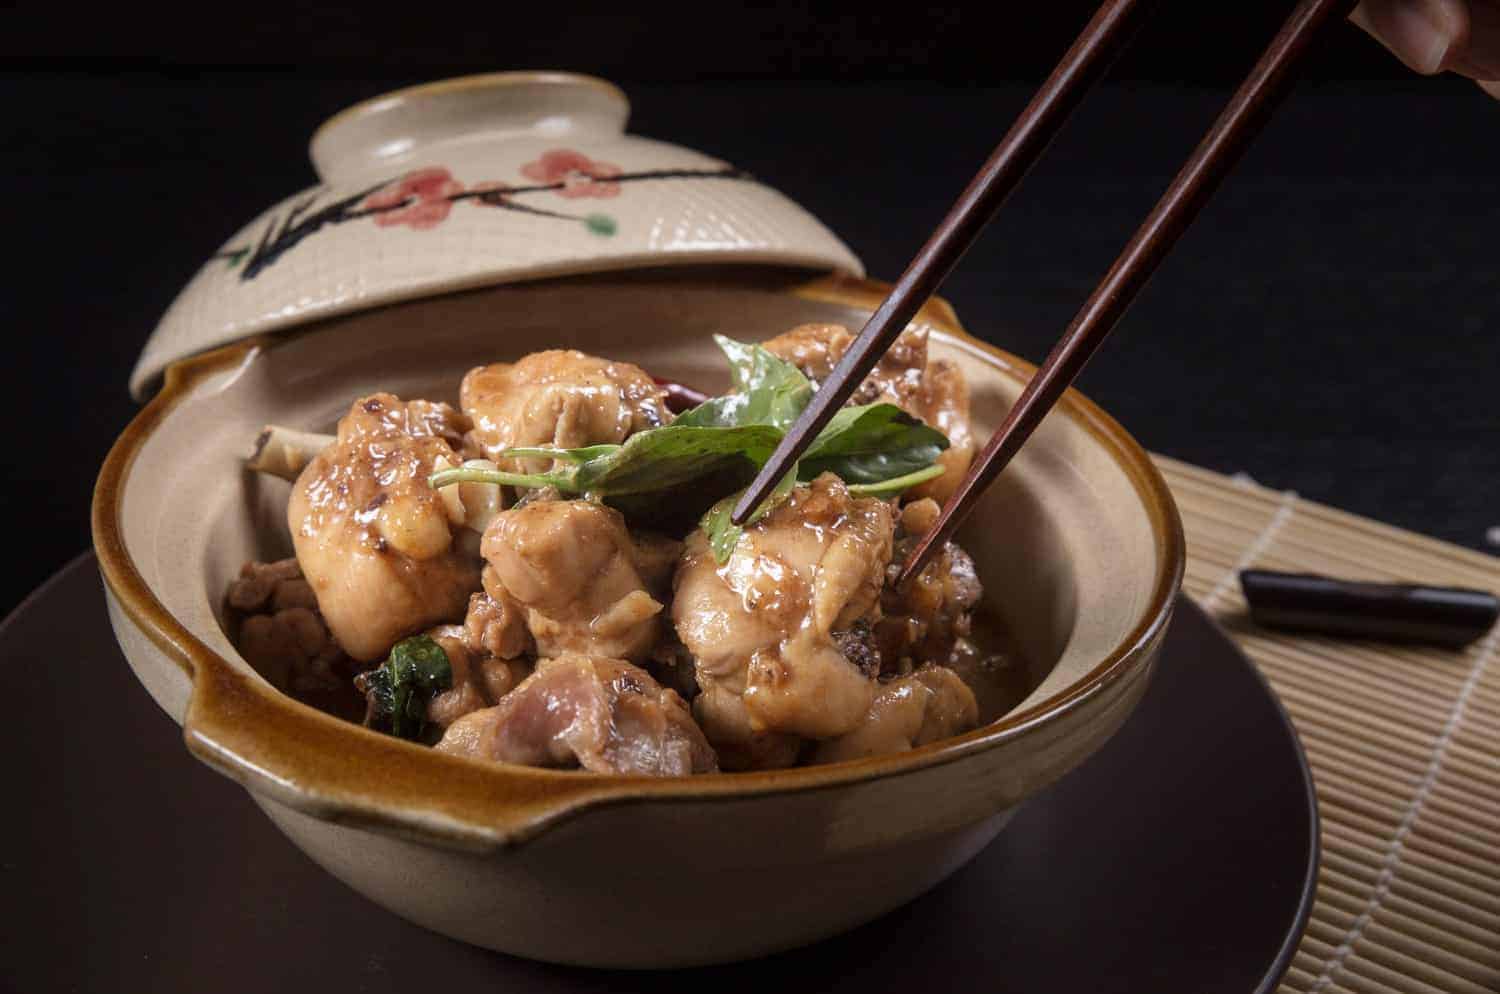 Classic Taiwanese Instant Pot Three Cup Chicken Recipe (San Bei Ji) 三杯鷄: tender chicken in fragrant, savory-spiced, slightly sweet secret sauce.